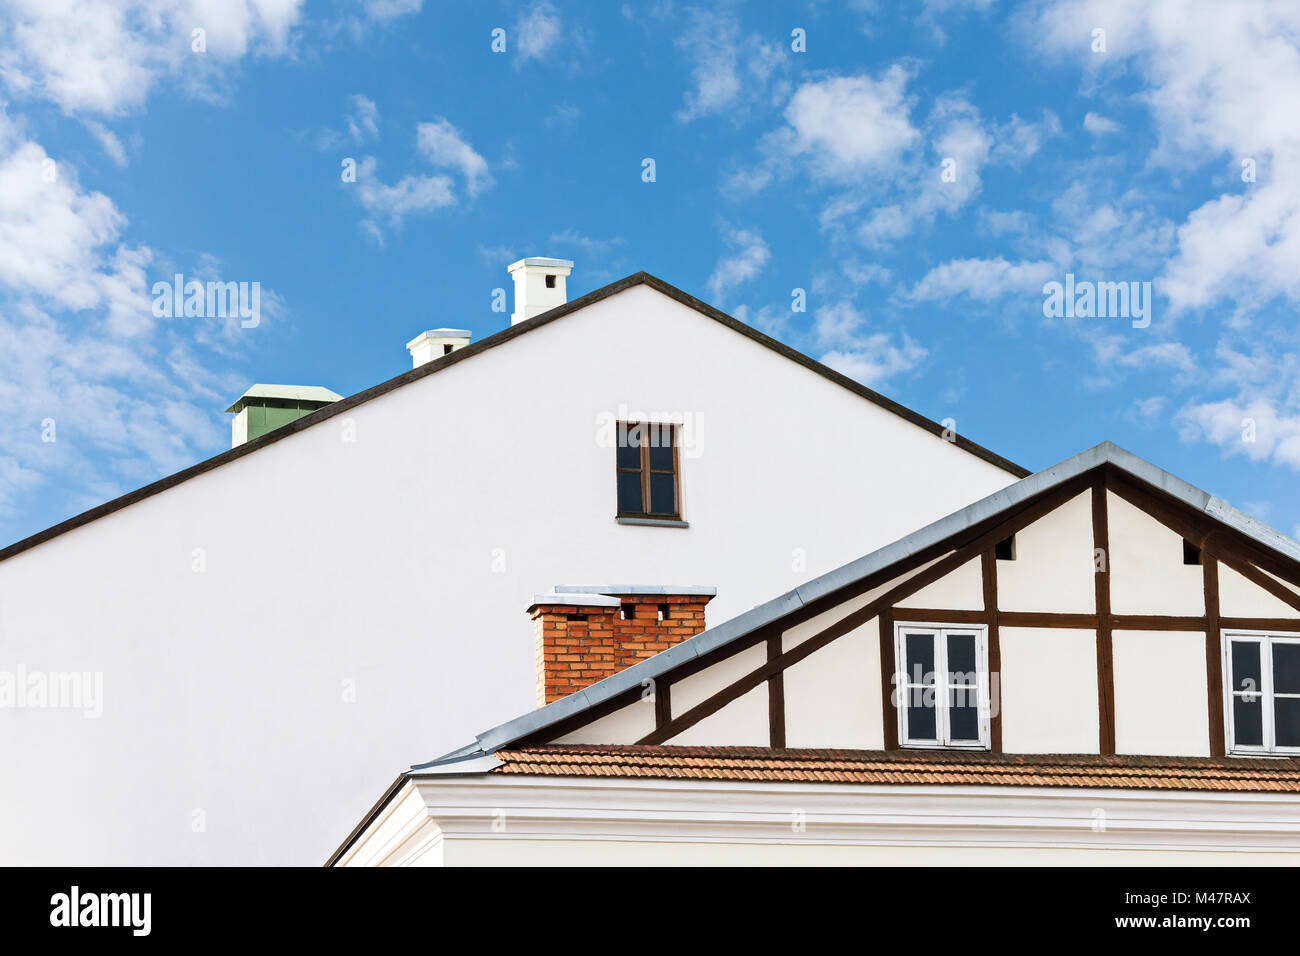 roofs of residential buildings against blue sky Stock Photo